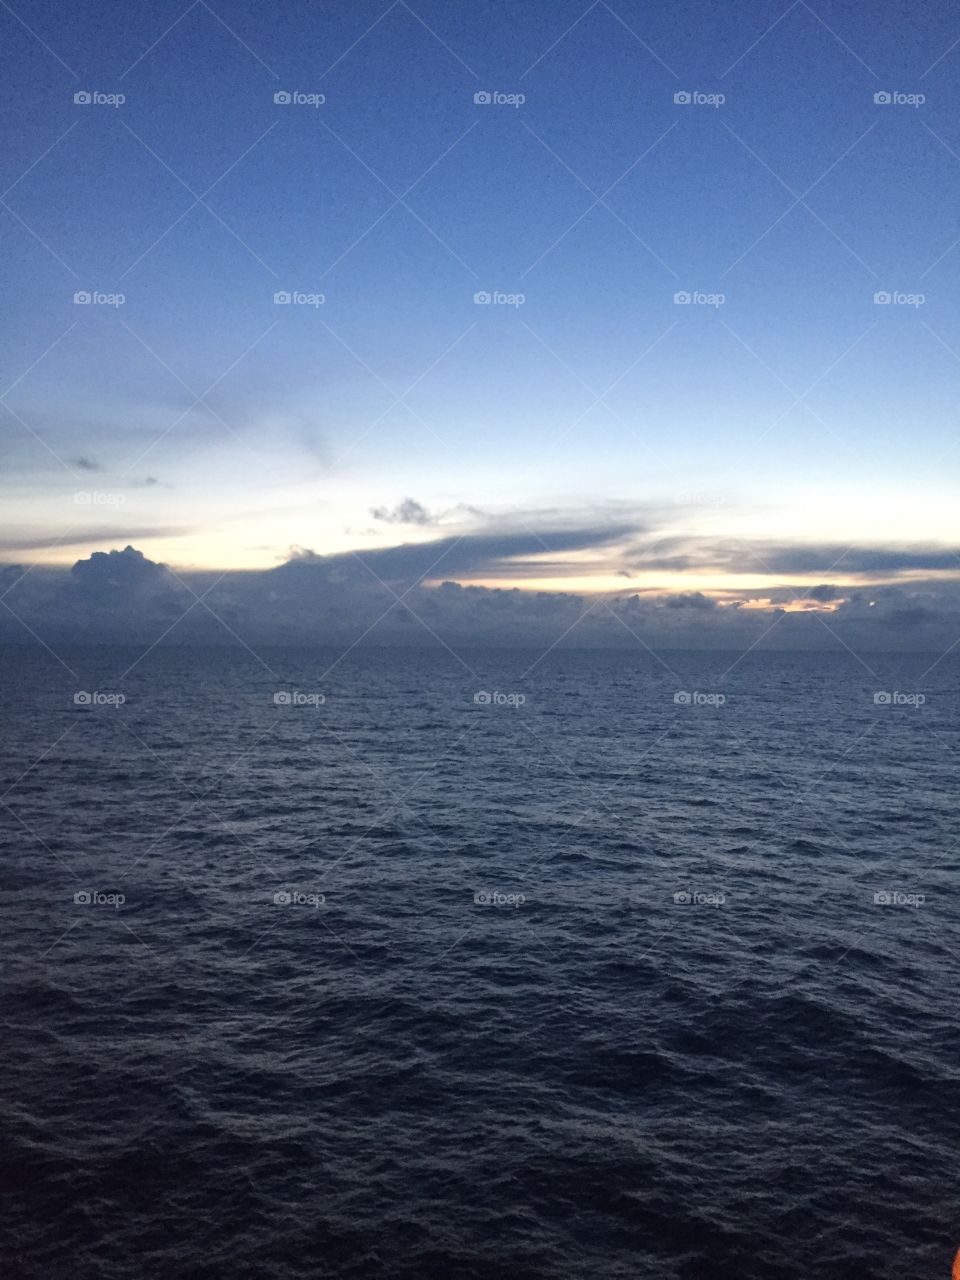 Photo taken of the last bit of light after sunset, 100 miles from land out in the Gulf of Mexico off of an oil platform. 